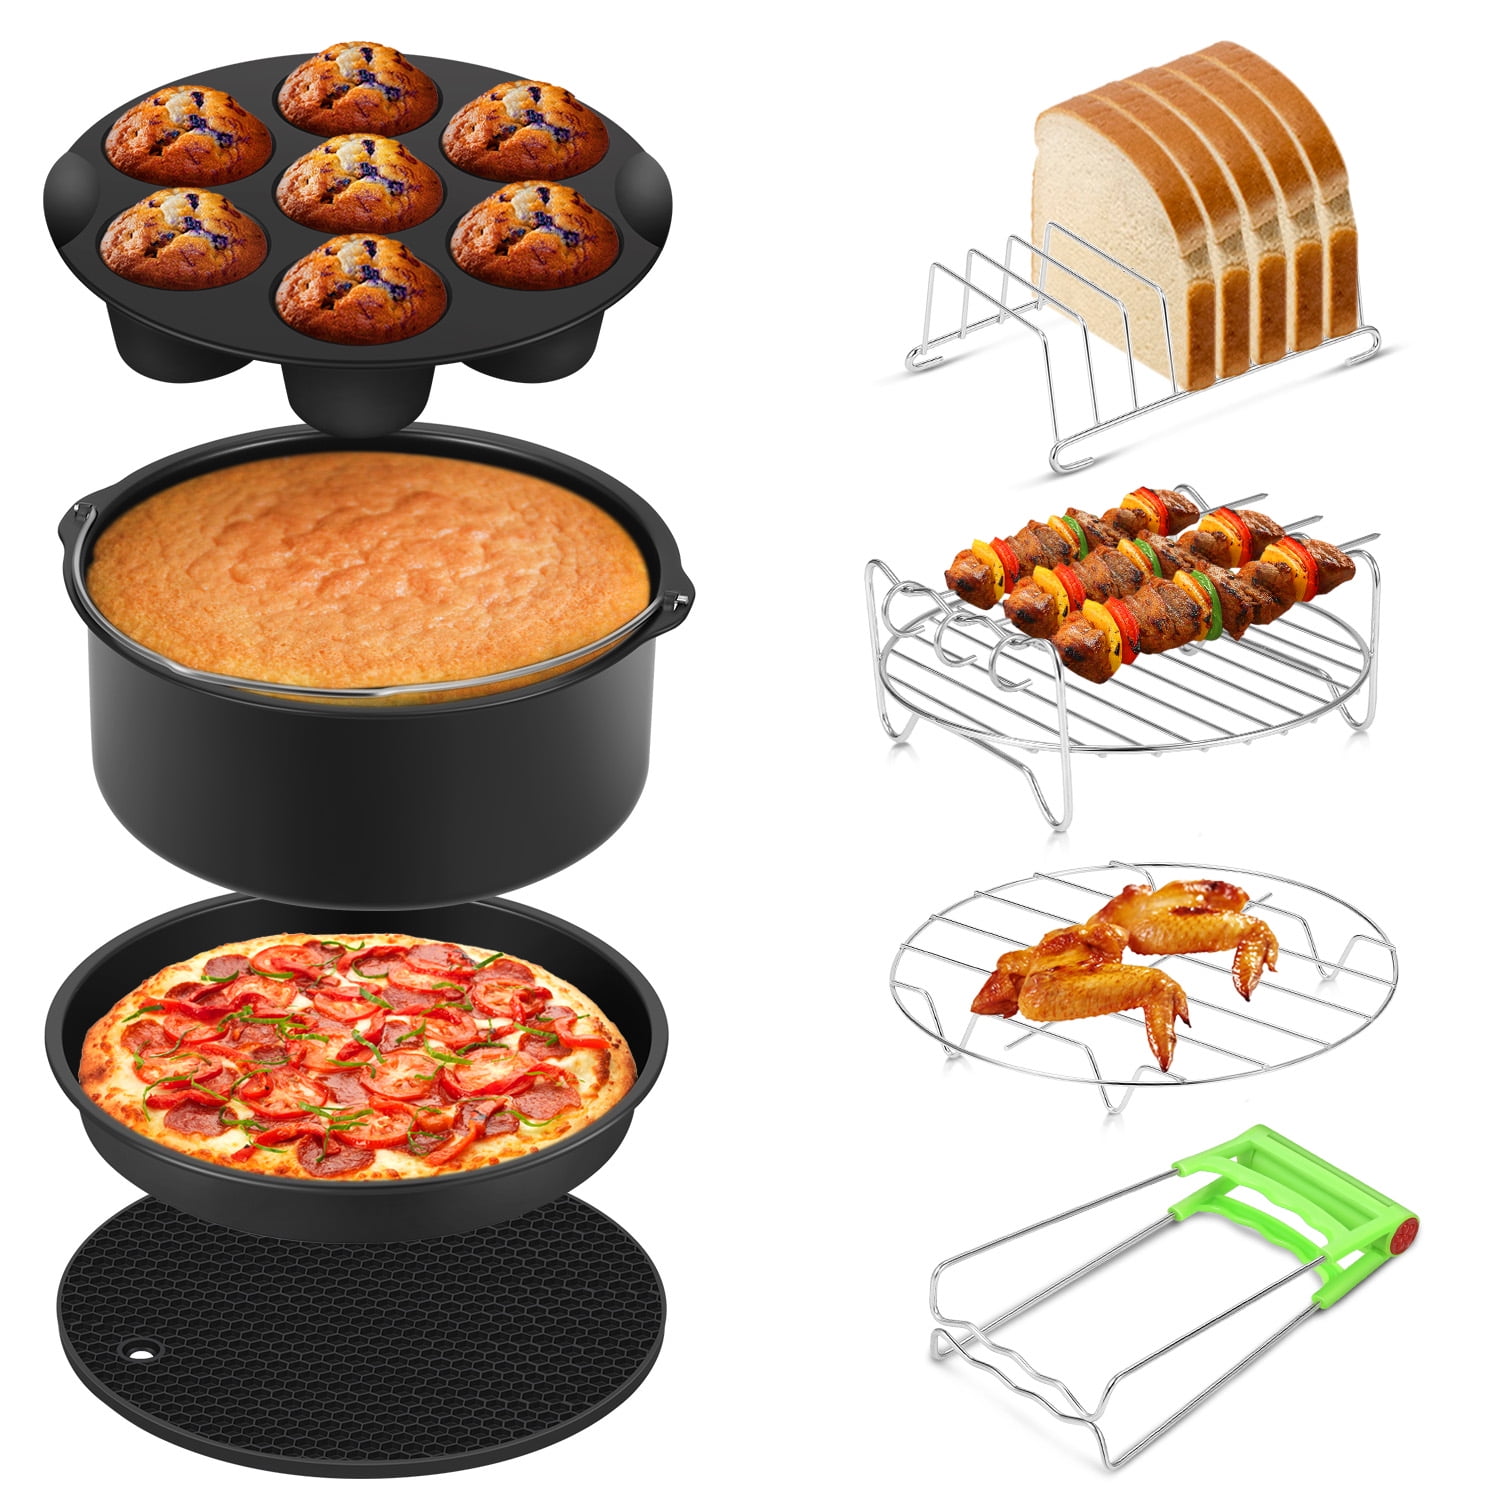  Air Fryer Accessories Set 12pcs Compatible for 4, 4.2, 5, 5.5,  5.8 QT Gowise Cosori Phillips Ninja Cozyna Air Fryer: Home & Kitchen